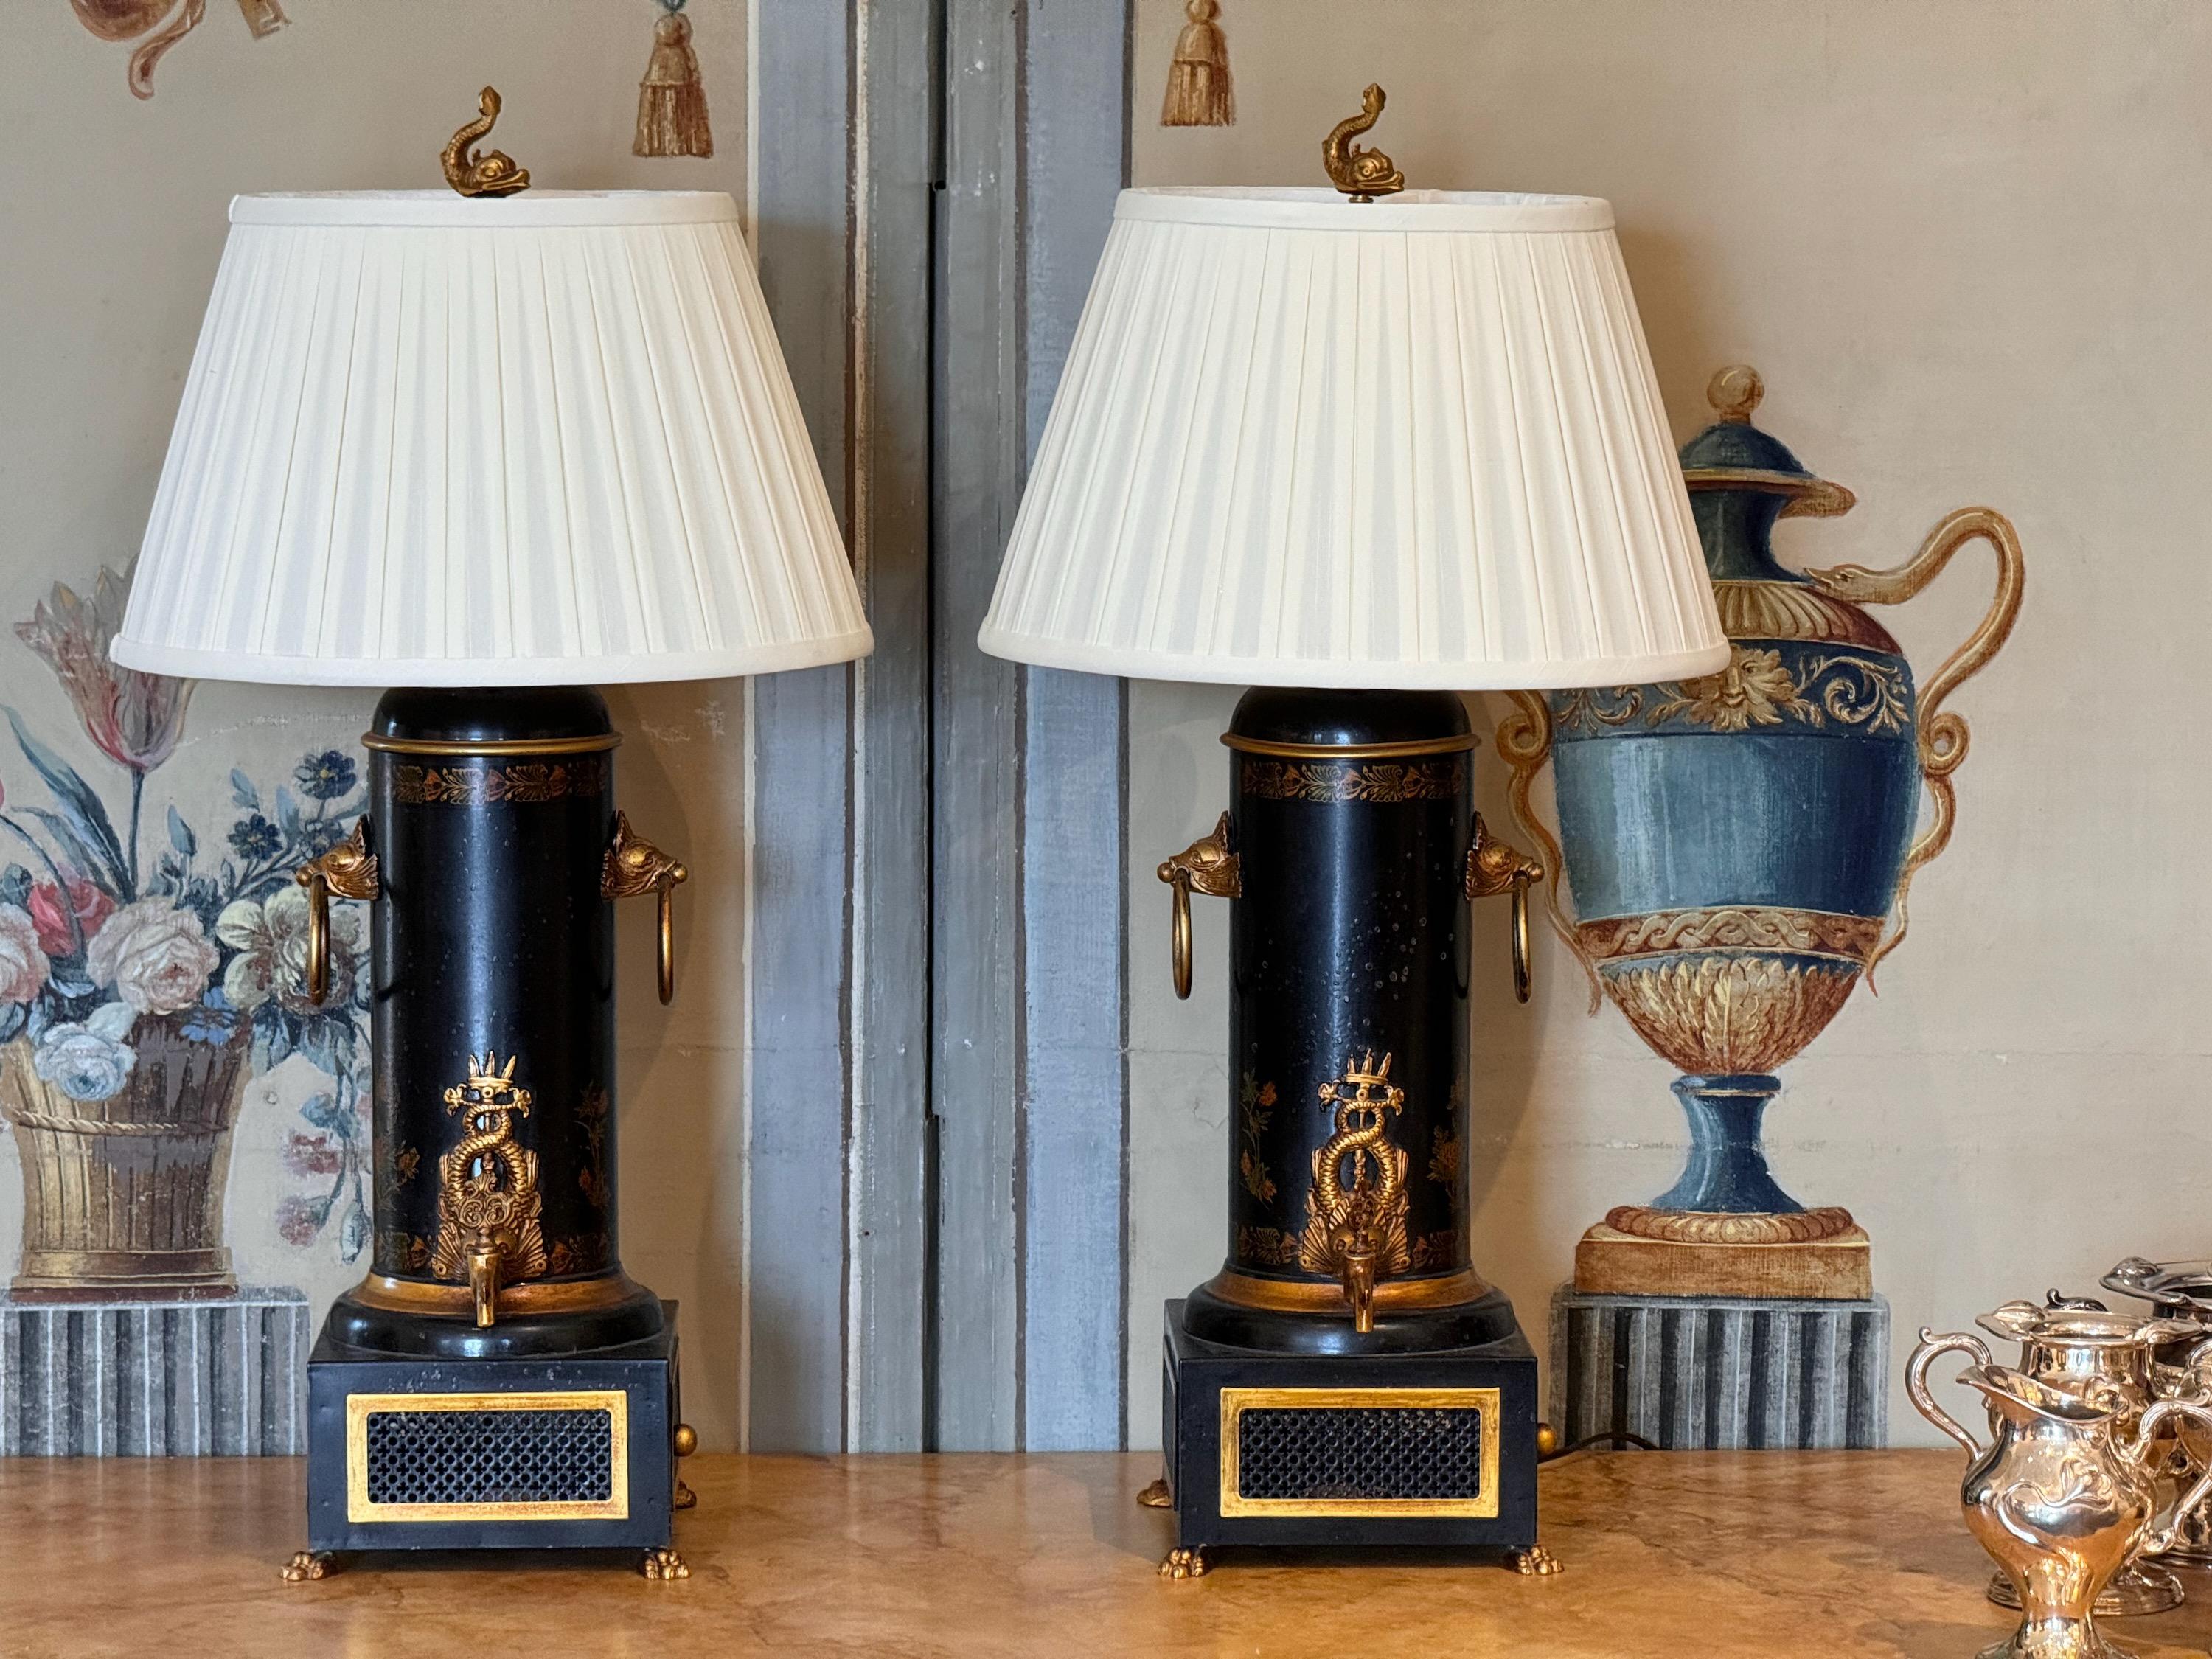 These are copies of 18th c water heaters, made into lamps.